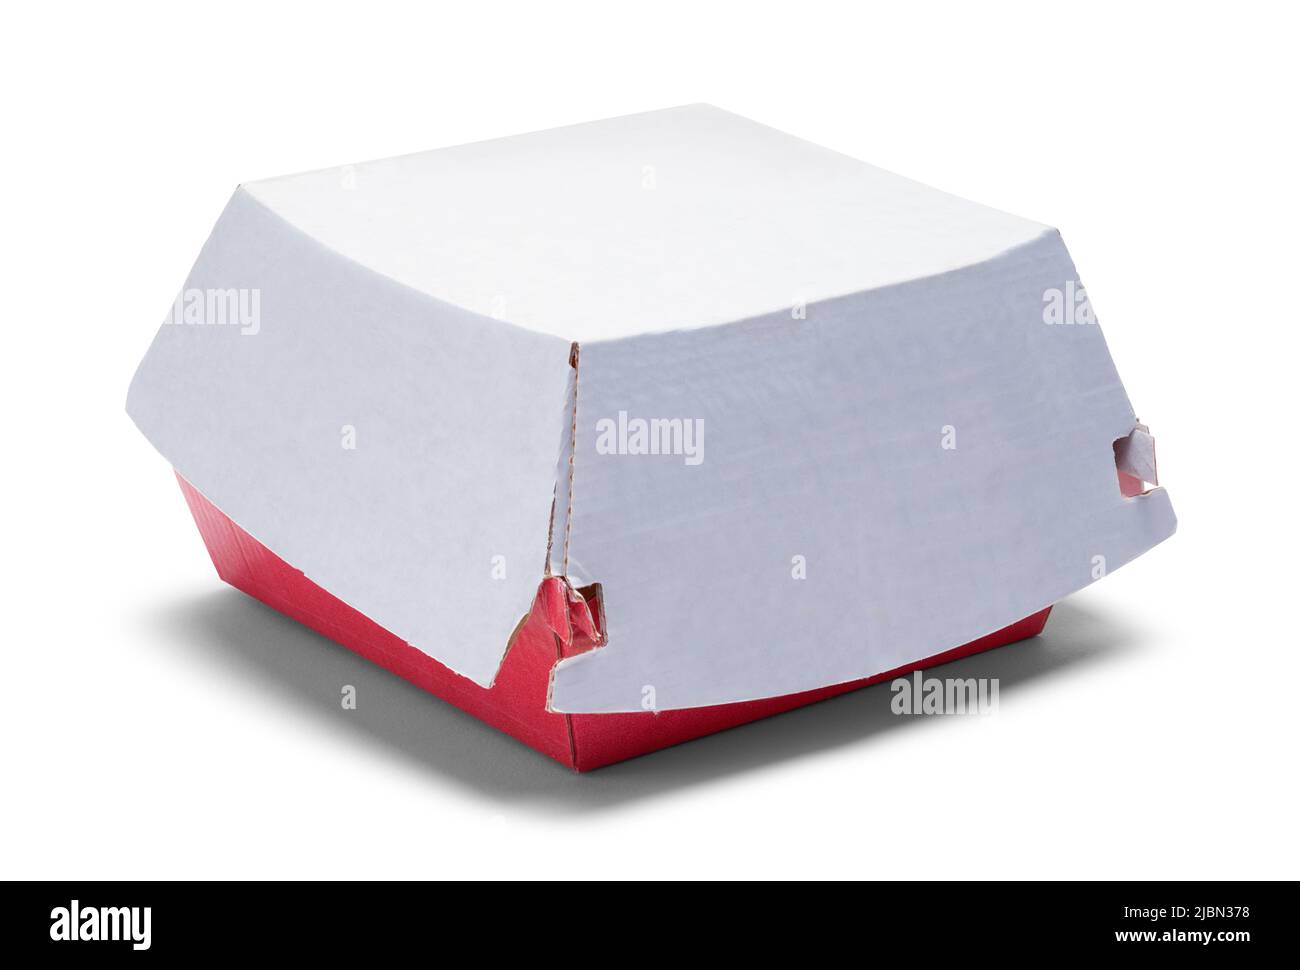 Fast Food Box Cut Out On White Background. Stock Photo